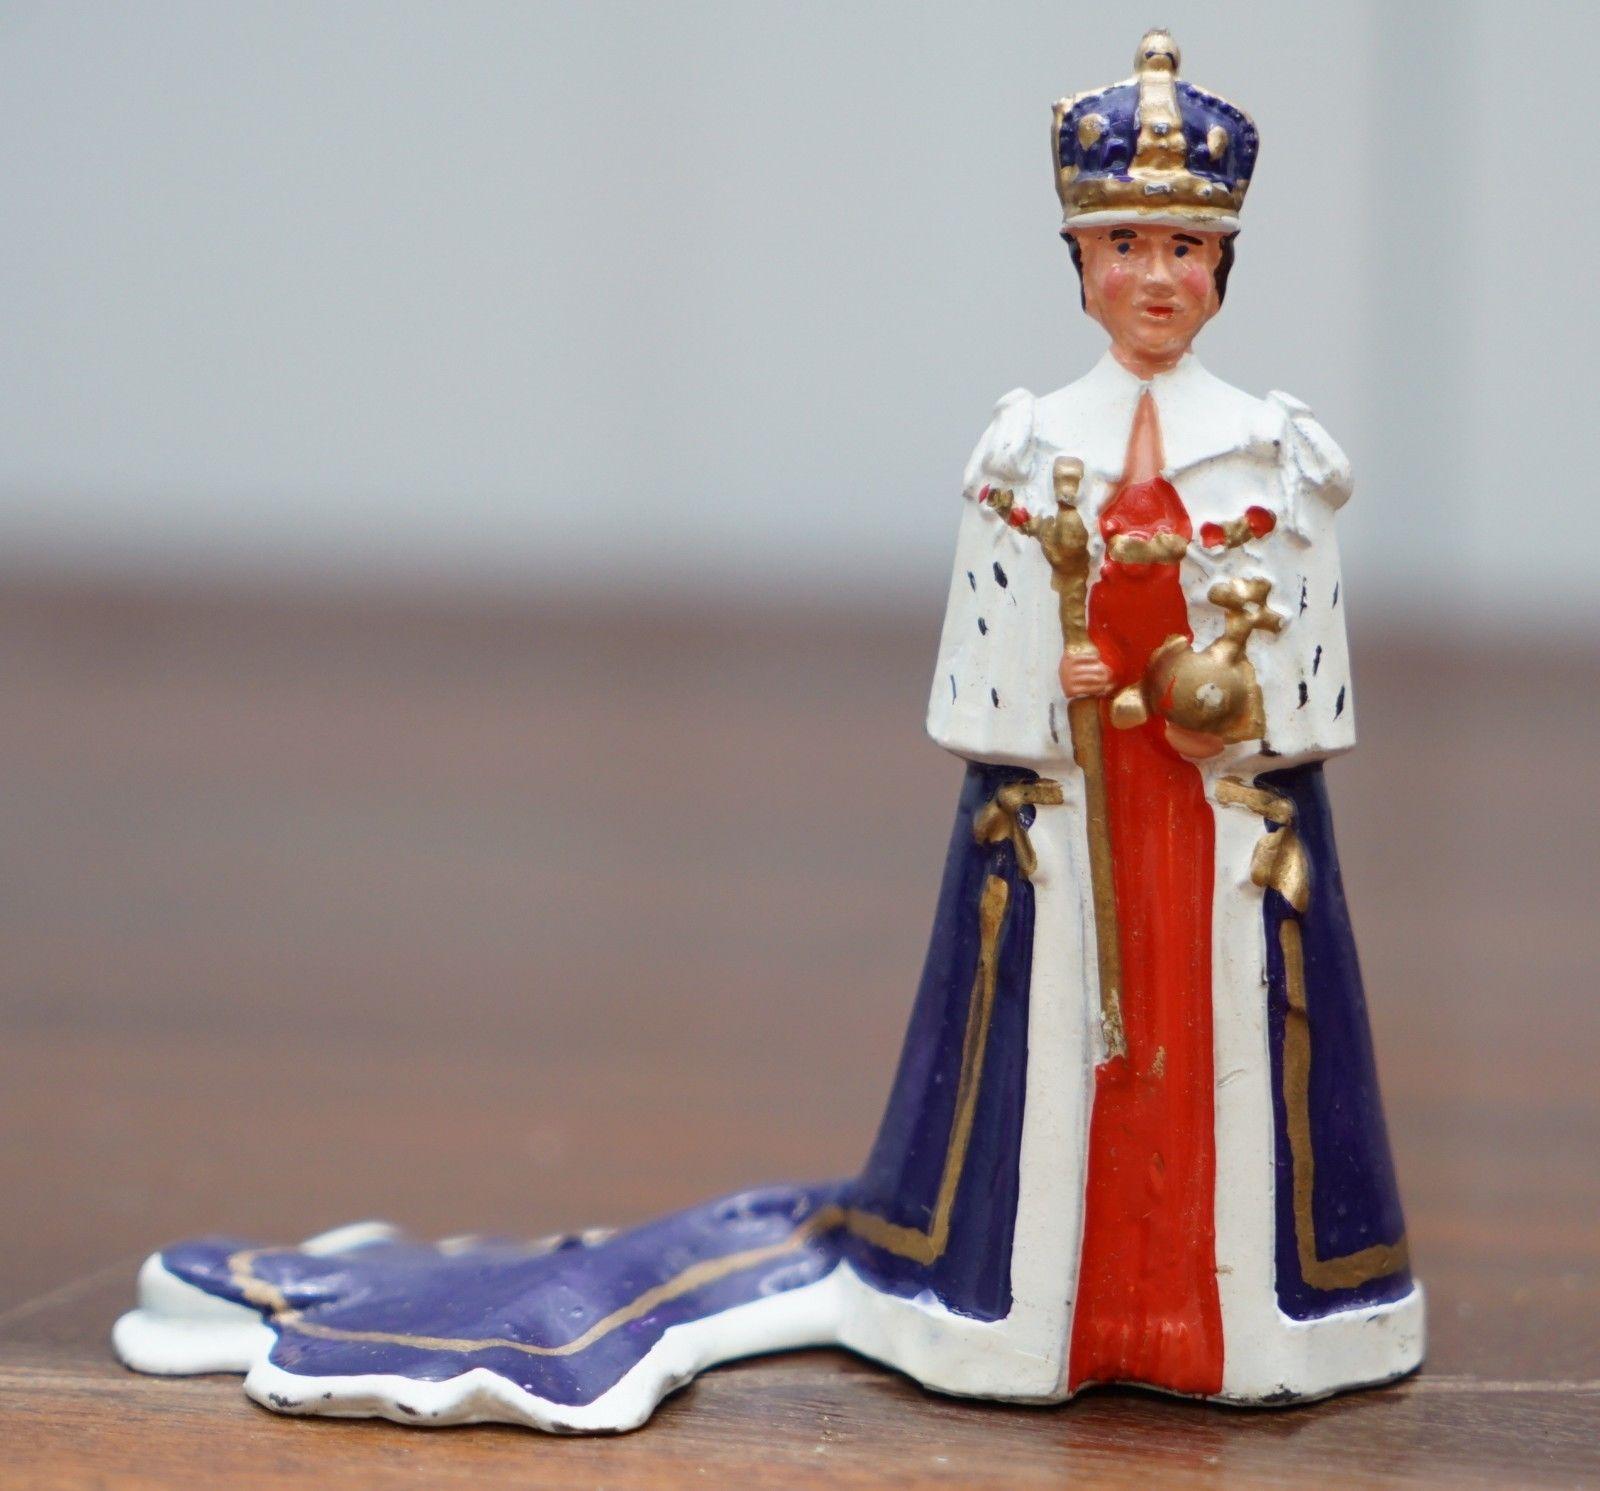 Hand-Carved Antique 1953 Lead Toy HM the Queen Elizabeth II Coronation Rare Boxed Original